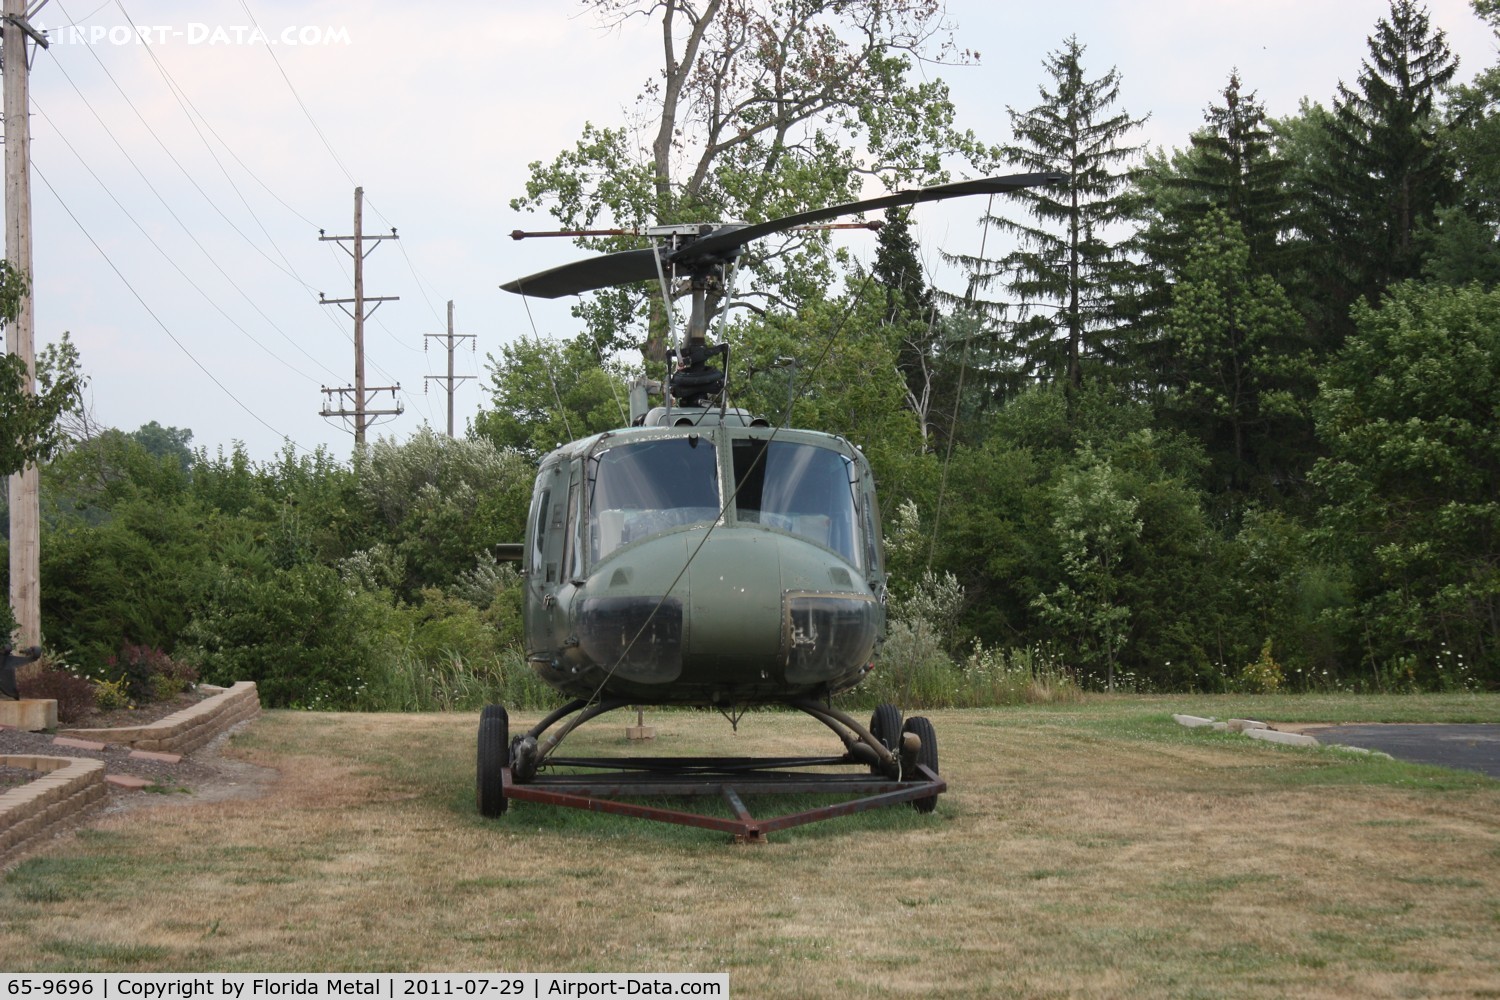 65-9696, 1965 Bell UH-1H Iroquois C/N 4640, UH-1H Huey outside a VFW Hall near Dayton OH airport